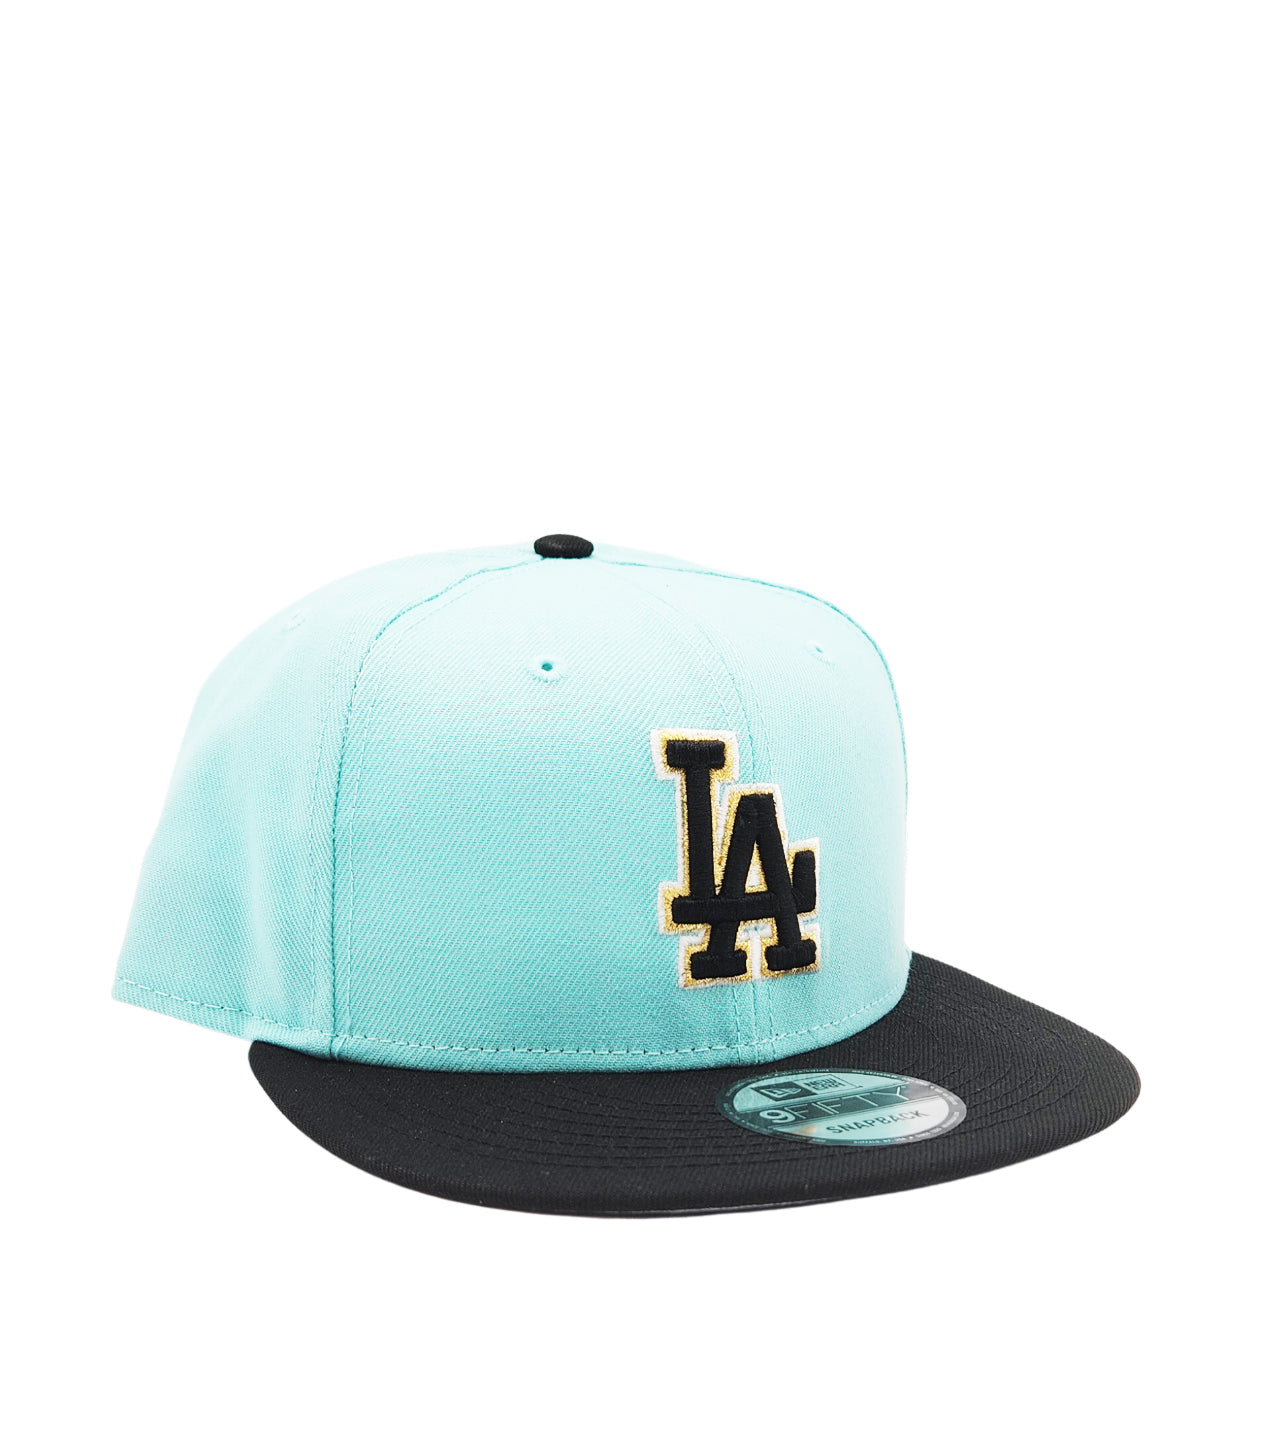 9FIFTY NEW ERA LOS ANGELES DODGERS TEAL SNAPBACK HAT